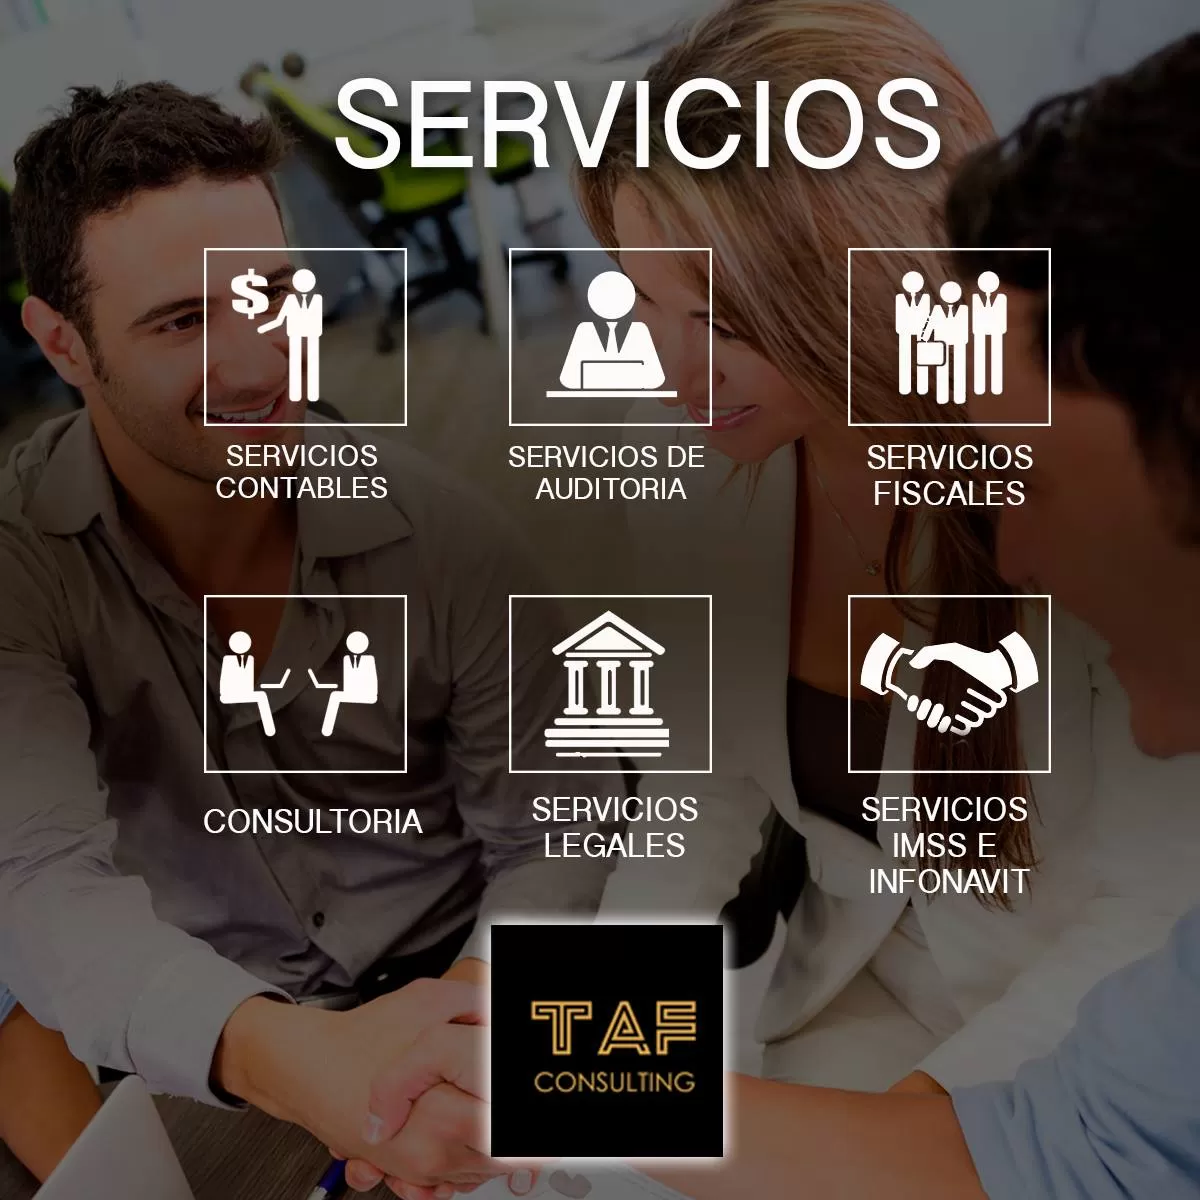 TAF CONSULTING